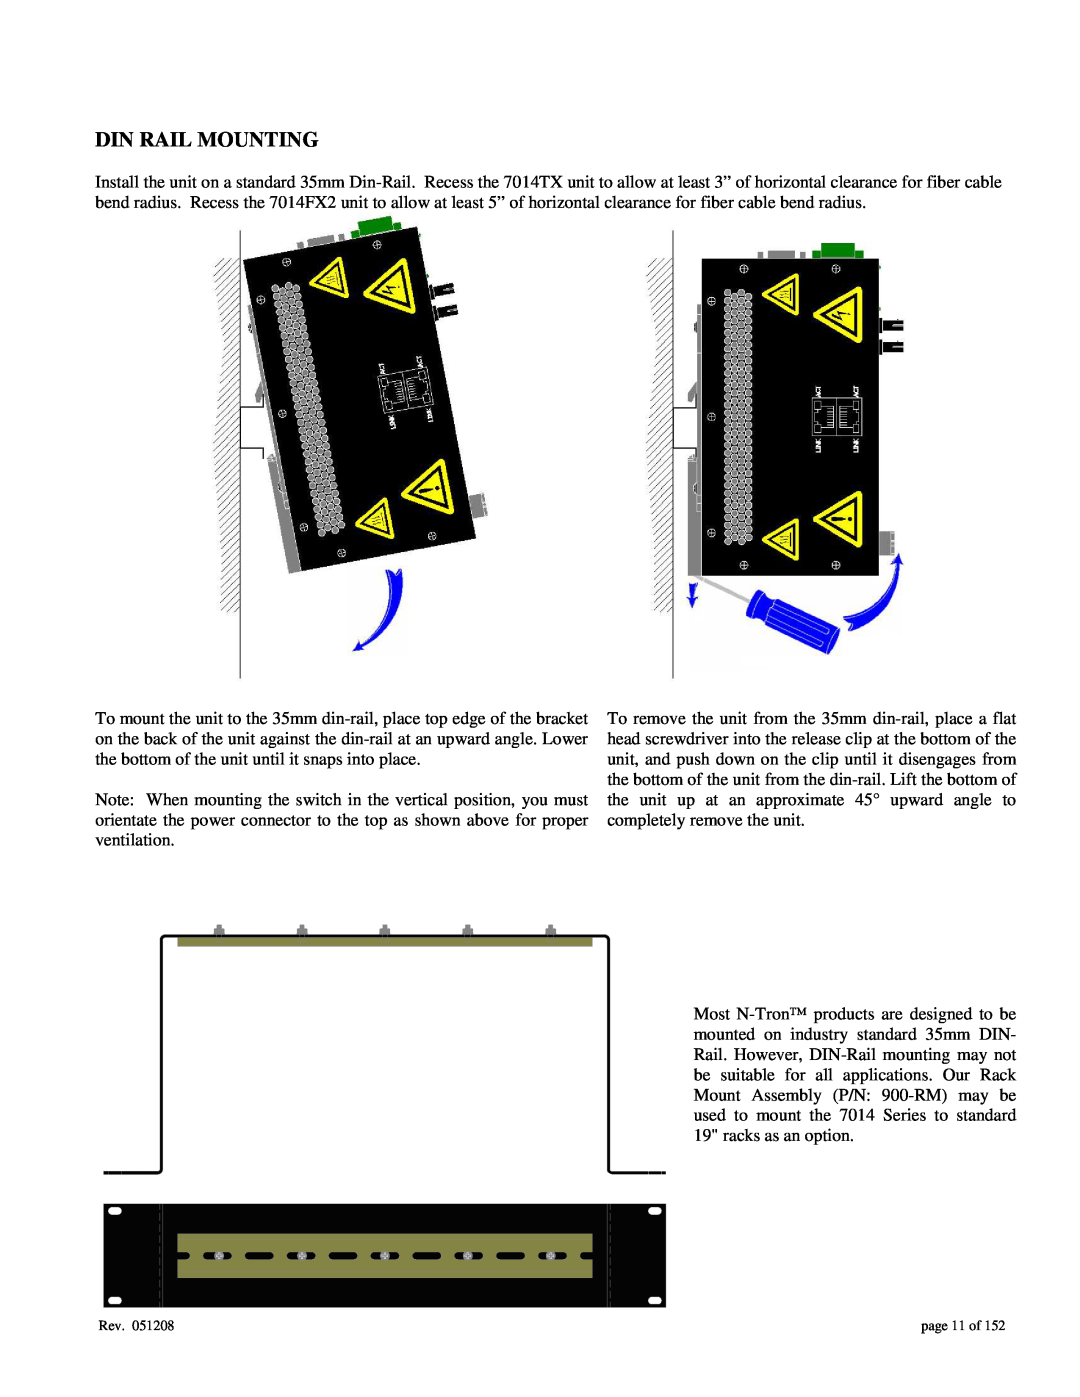 Gigabyte 7014 user manual Din Rail Mounting, page 11 of 